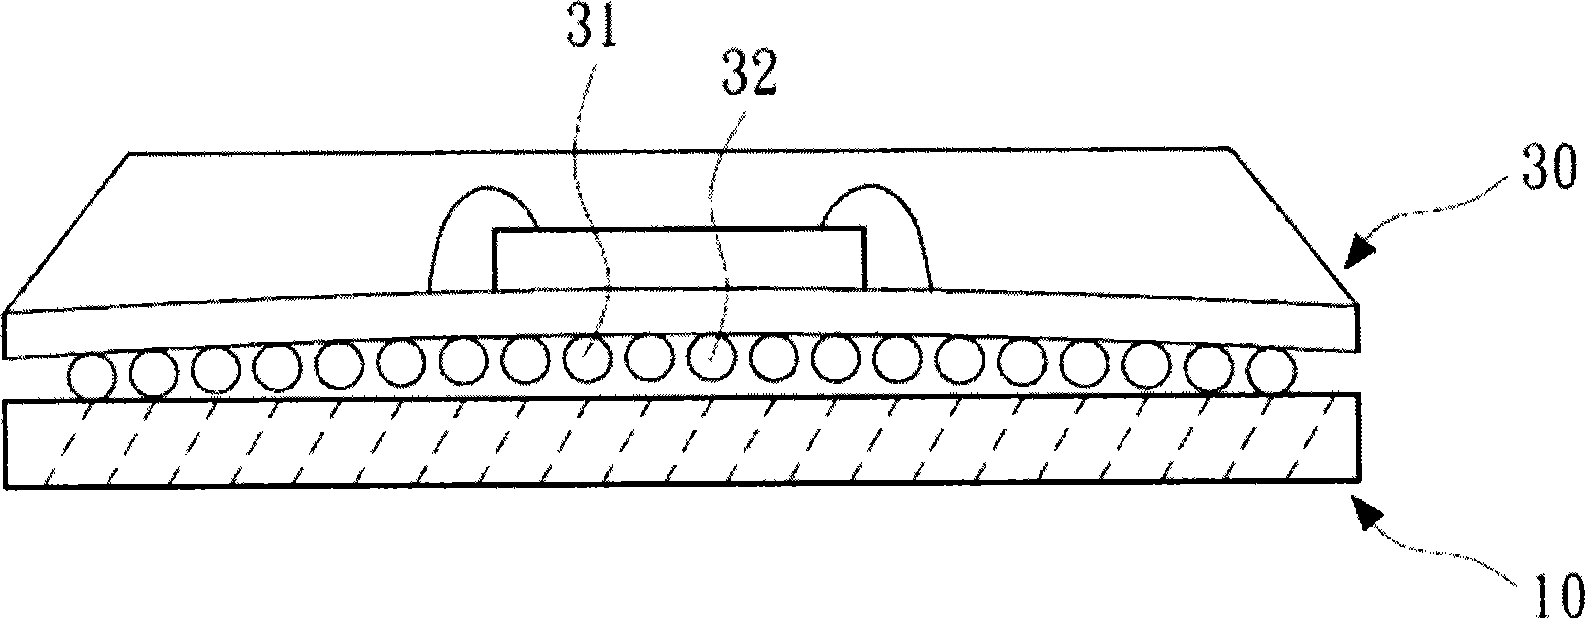 Conductive rubber having conducting wire evagination for test